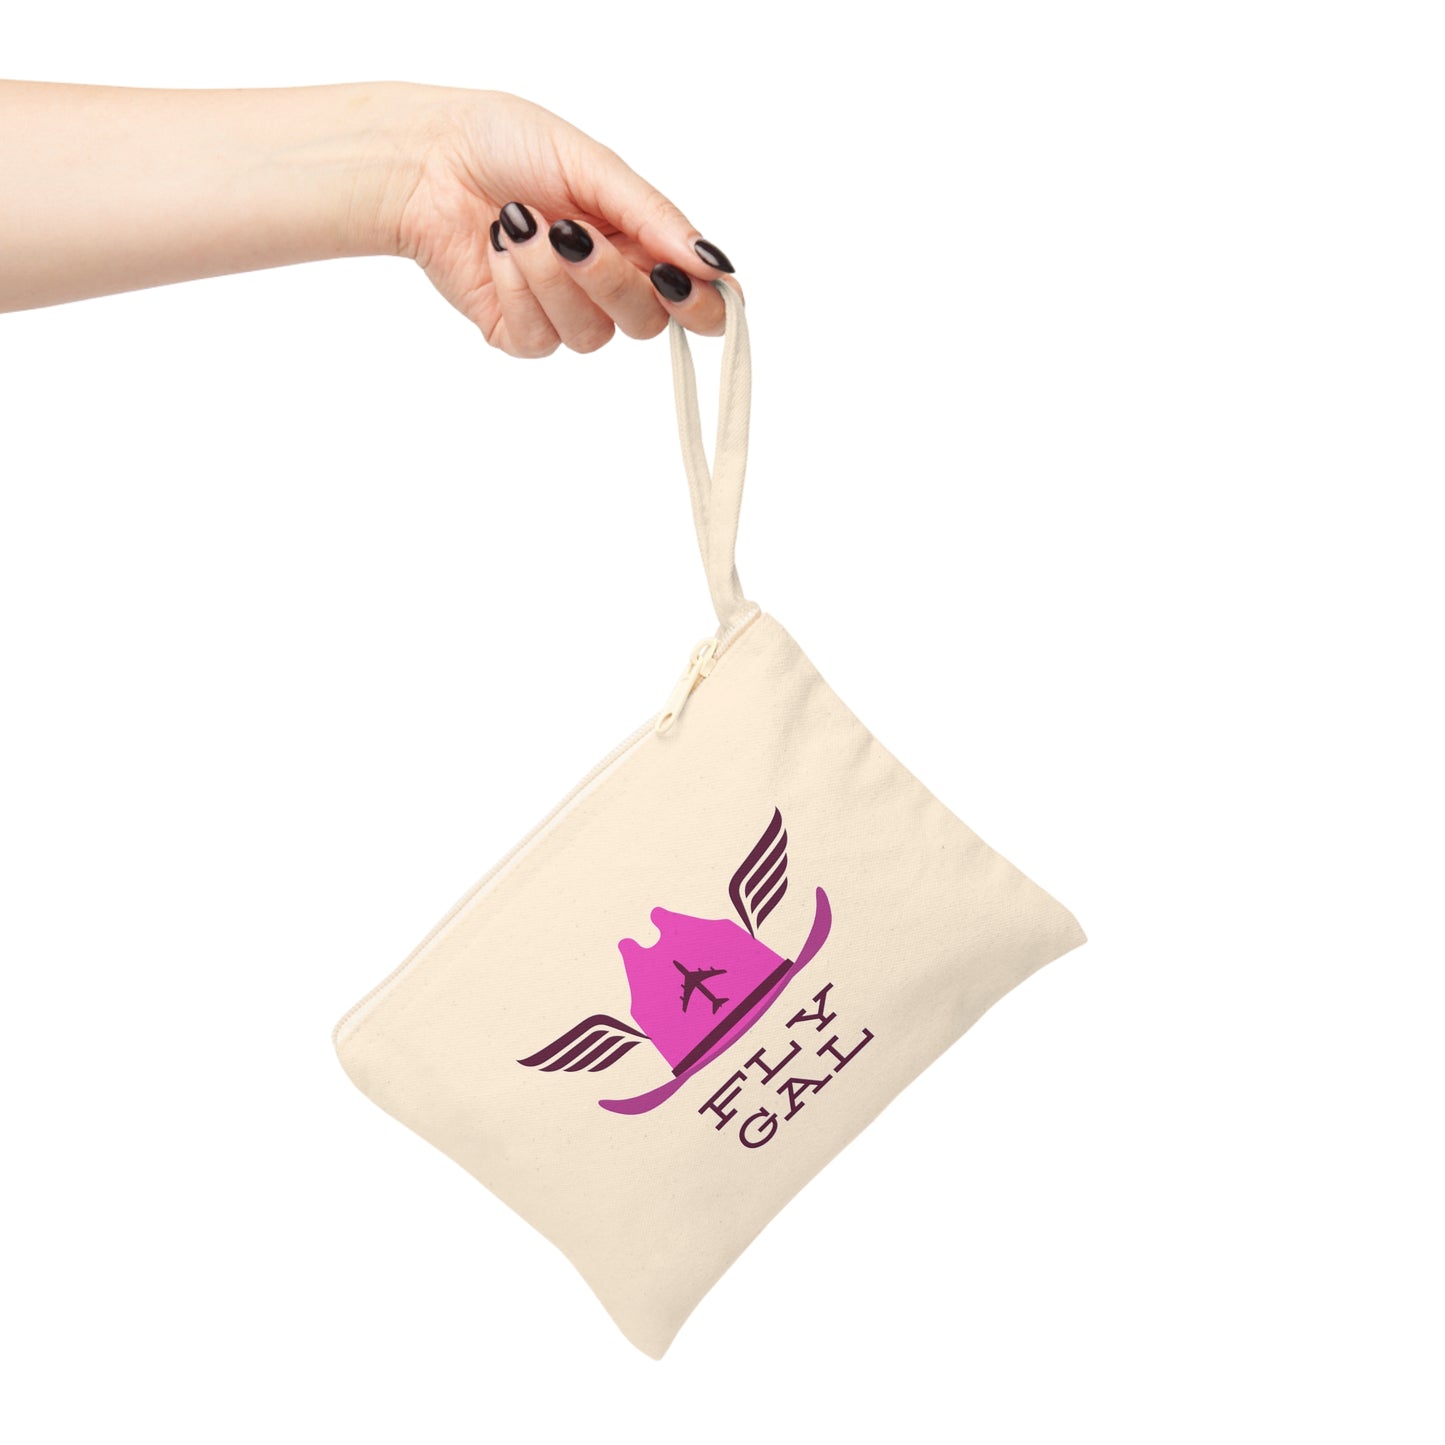 Fly Gal Travel Packing Bag  & Toiletry Pouch